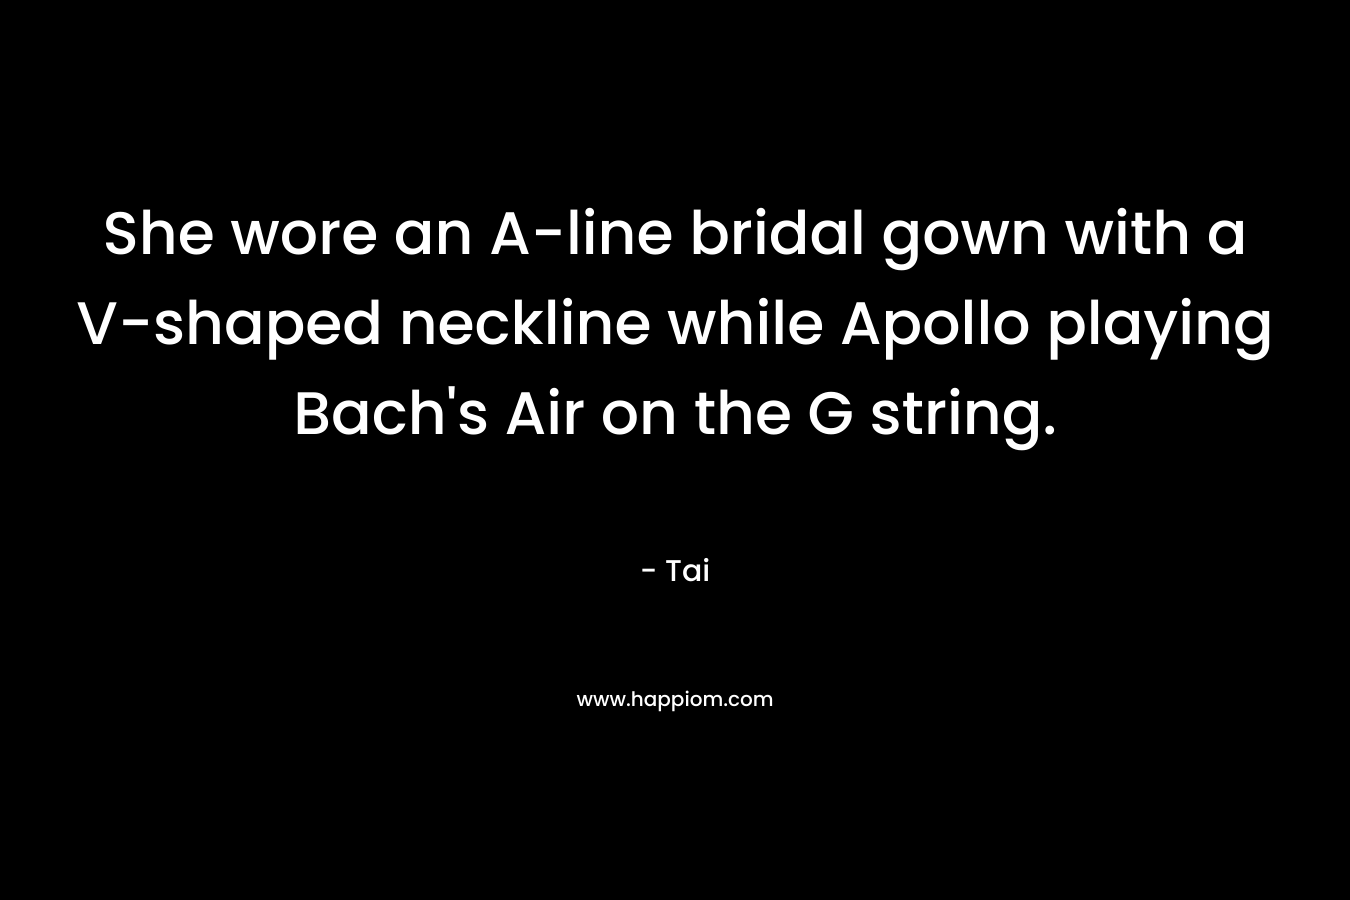 She wore an A-line bridal gown with a V-shaped neckline while Apollo playing Bach's Air on the G string.